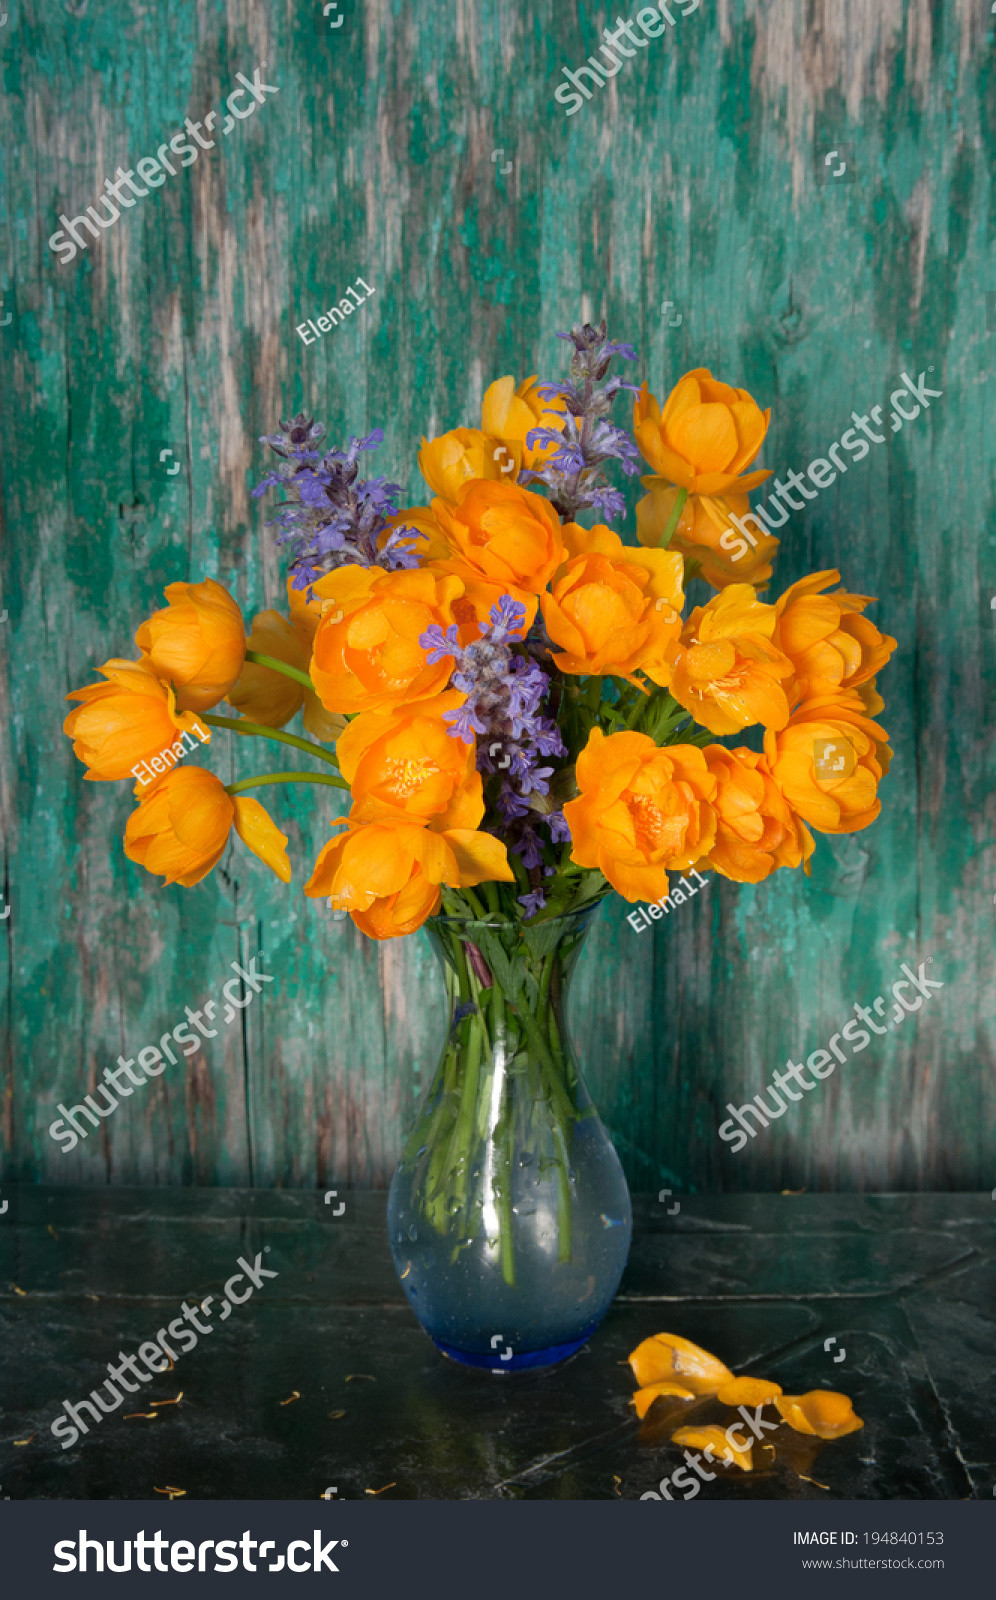 16 attractive Still Life Vase Of Flowers 2024 free download still life vase of flowers of still life bouquet globe flowers stock photo edit now 194840153 with regard to still life bouquet with globe flowers